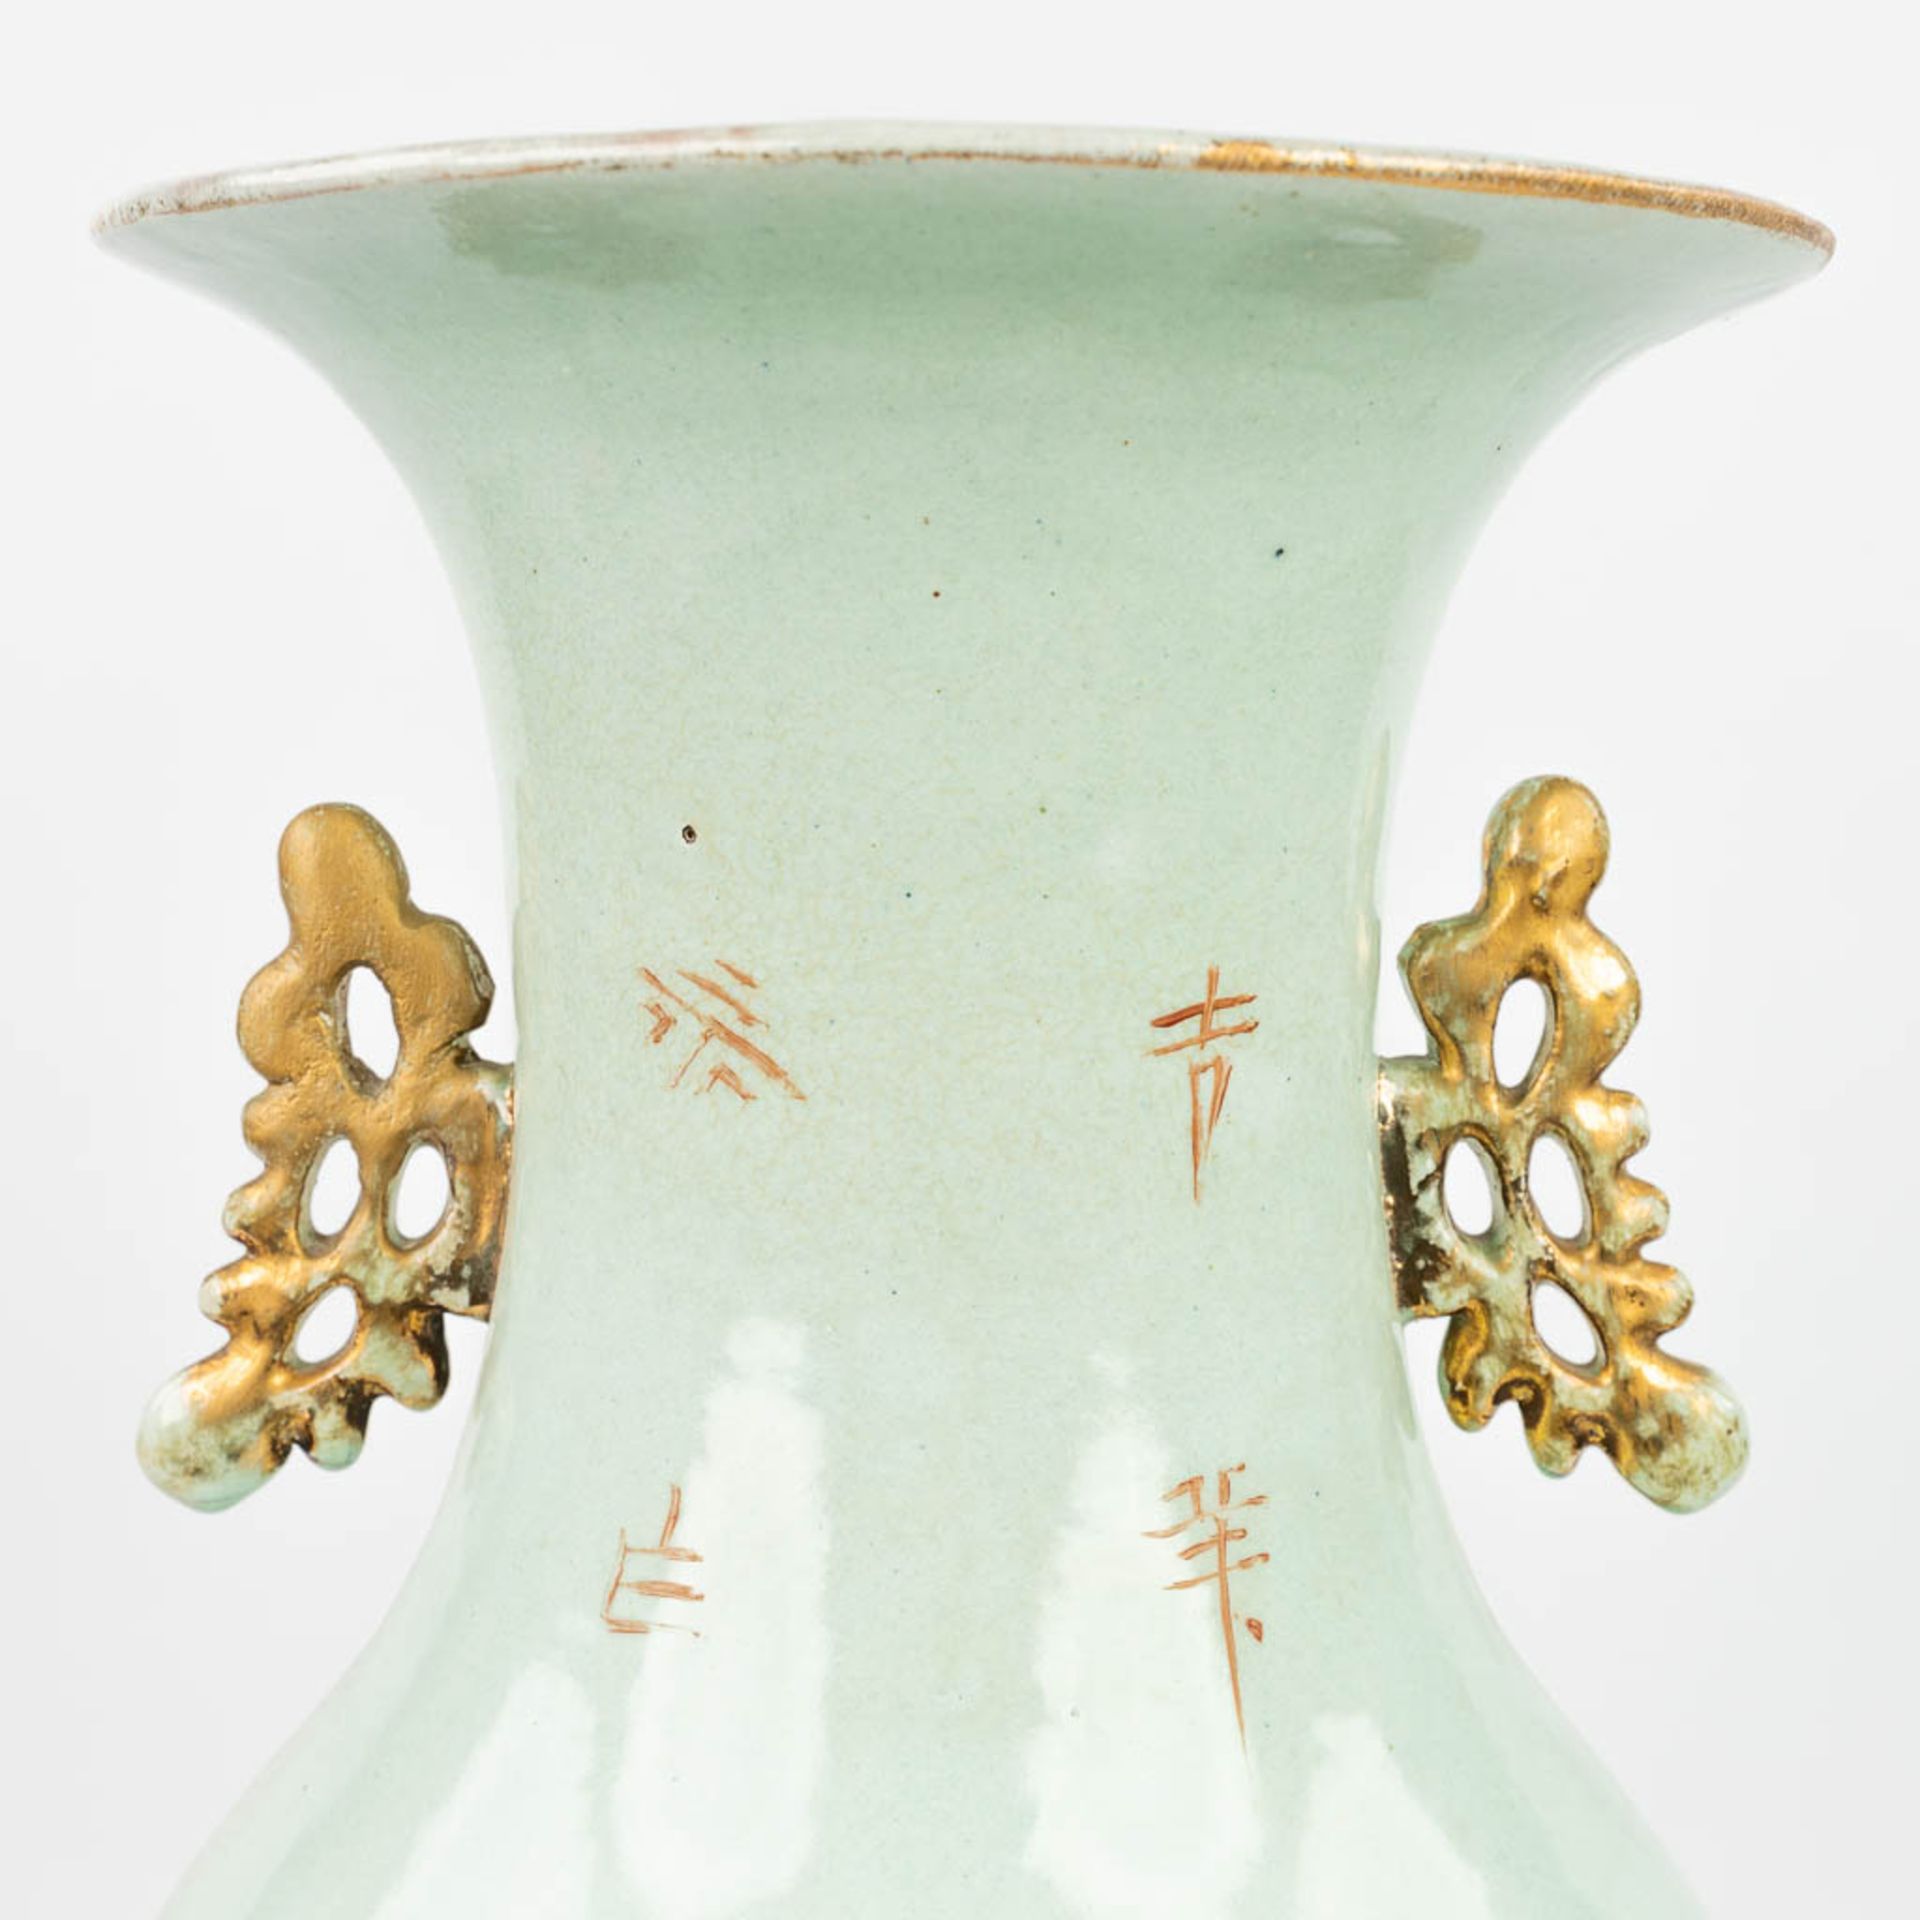 A Chinese vase made of porcelain and decorated with birds. (H:57cm) - Image 10 of 16